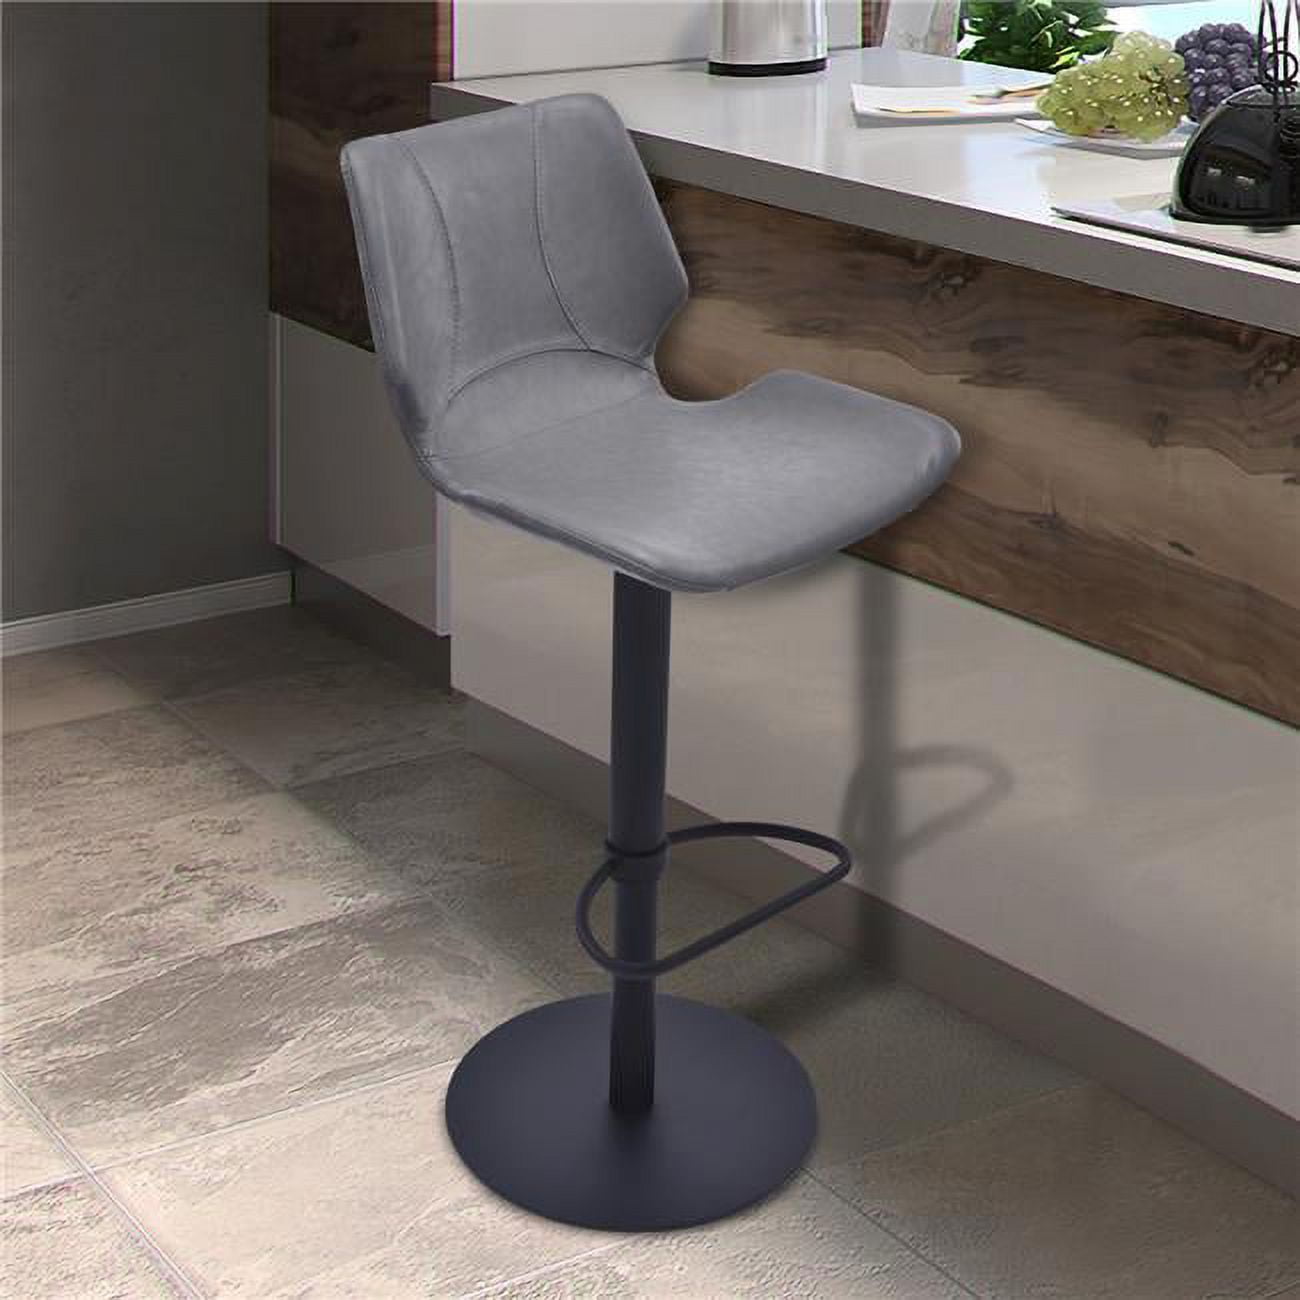 Picture of Armen Living LCZUBAVGBL Zuma Adjustable Swivel Metal Barstool in Vintage Gray Faux Leather Black Metal